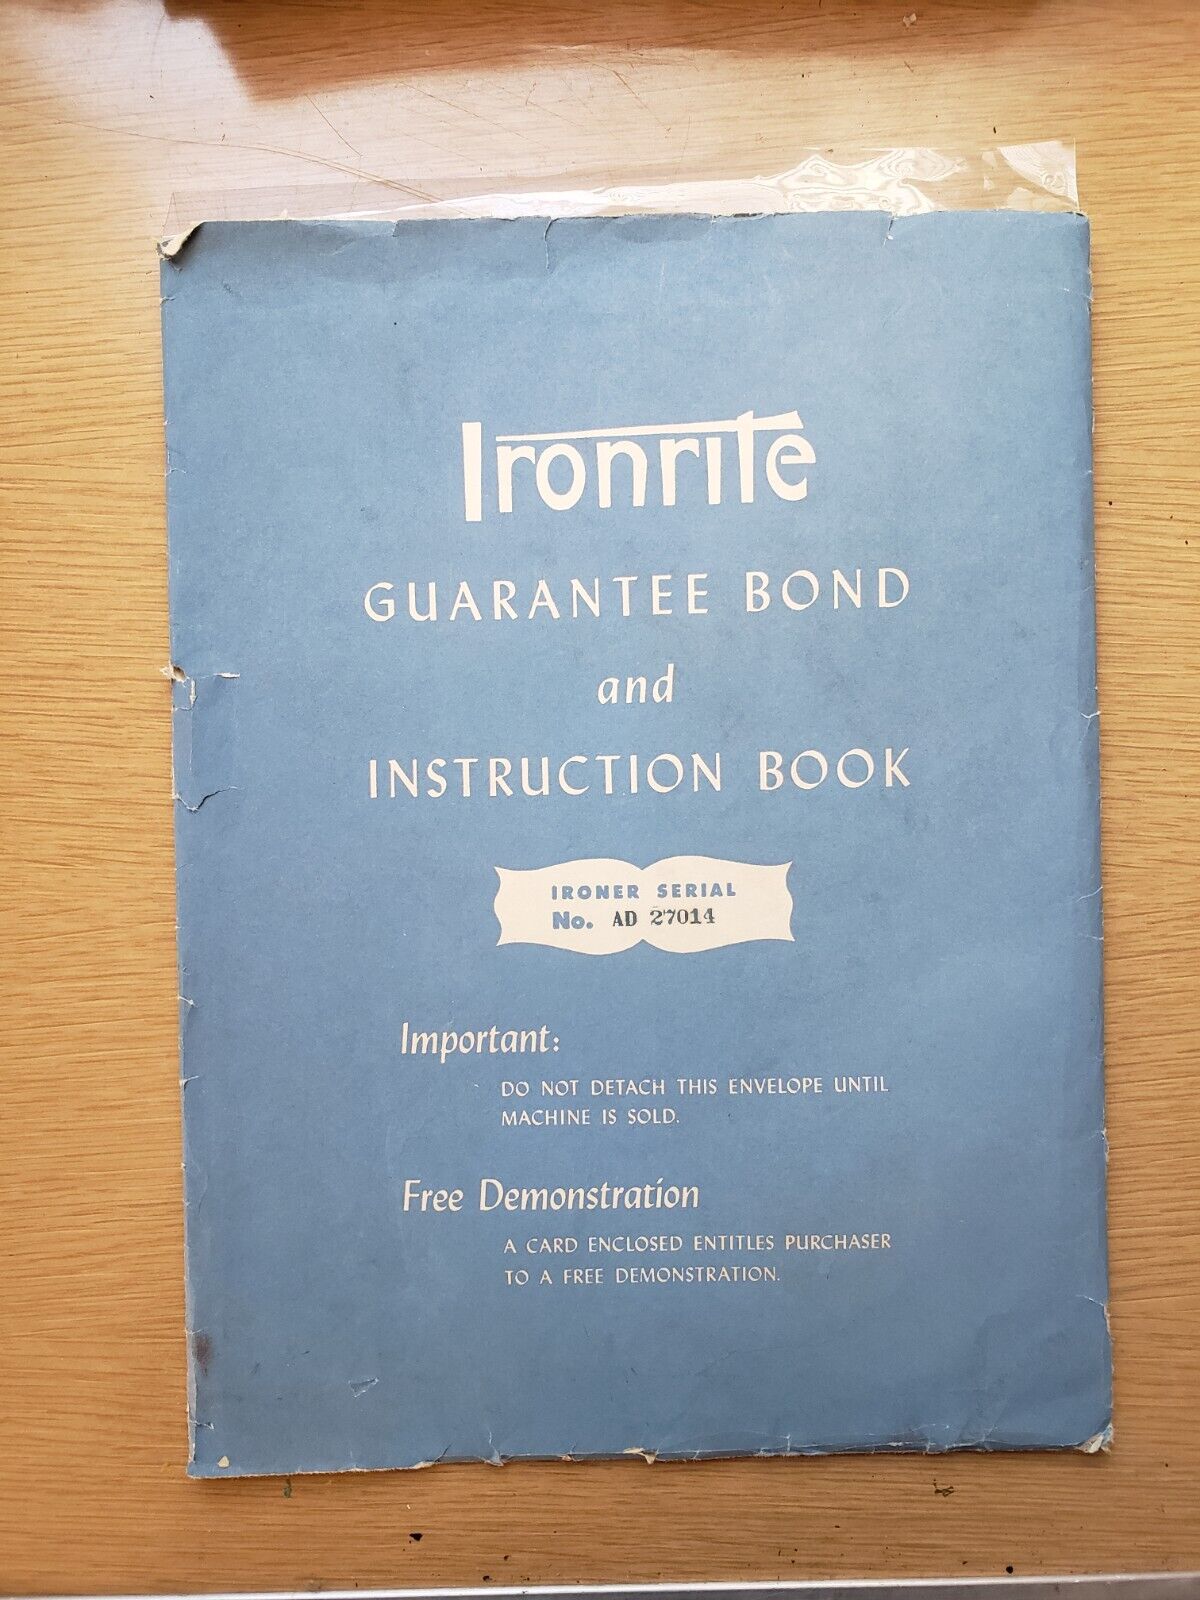 IRONRITE OWNER'S MANUAL - How to Use Your Ironrite Automatic Ironer - 1948 Plus